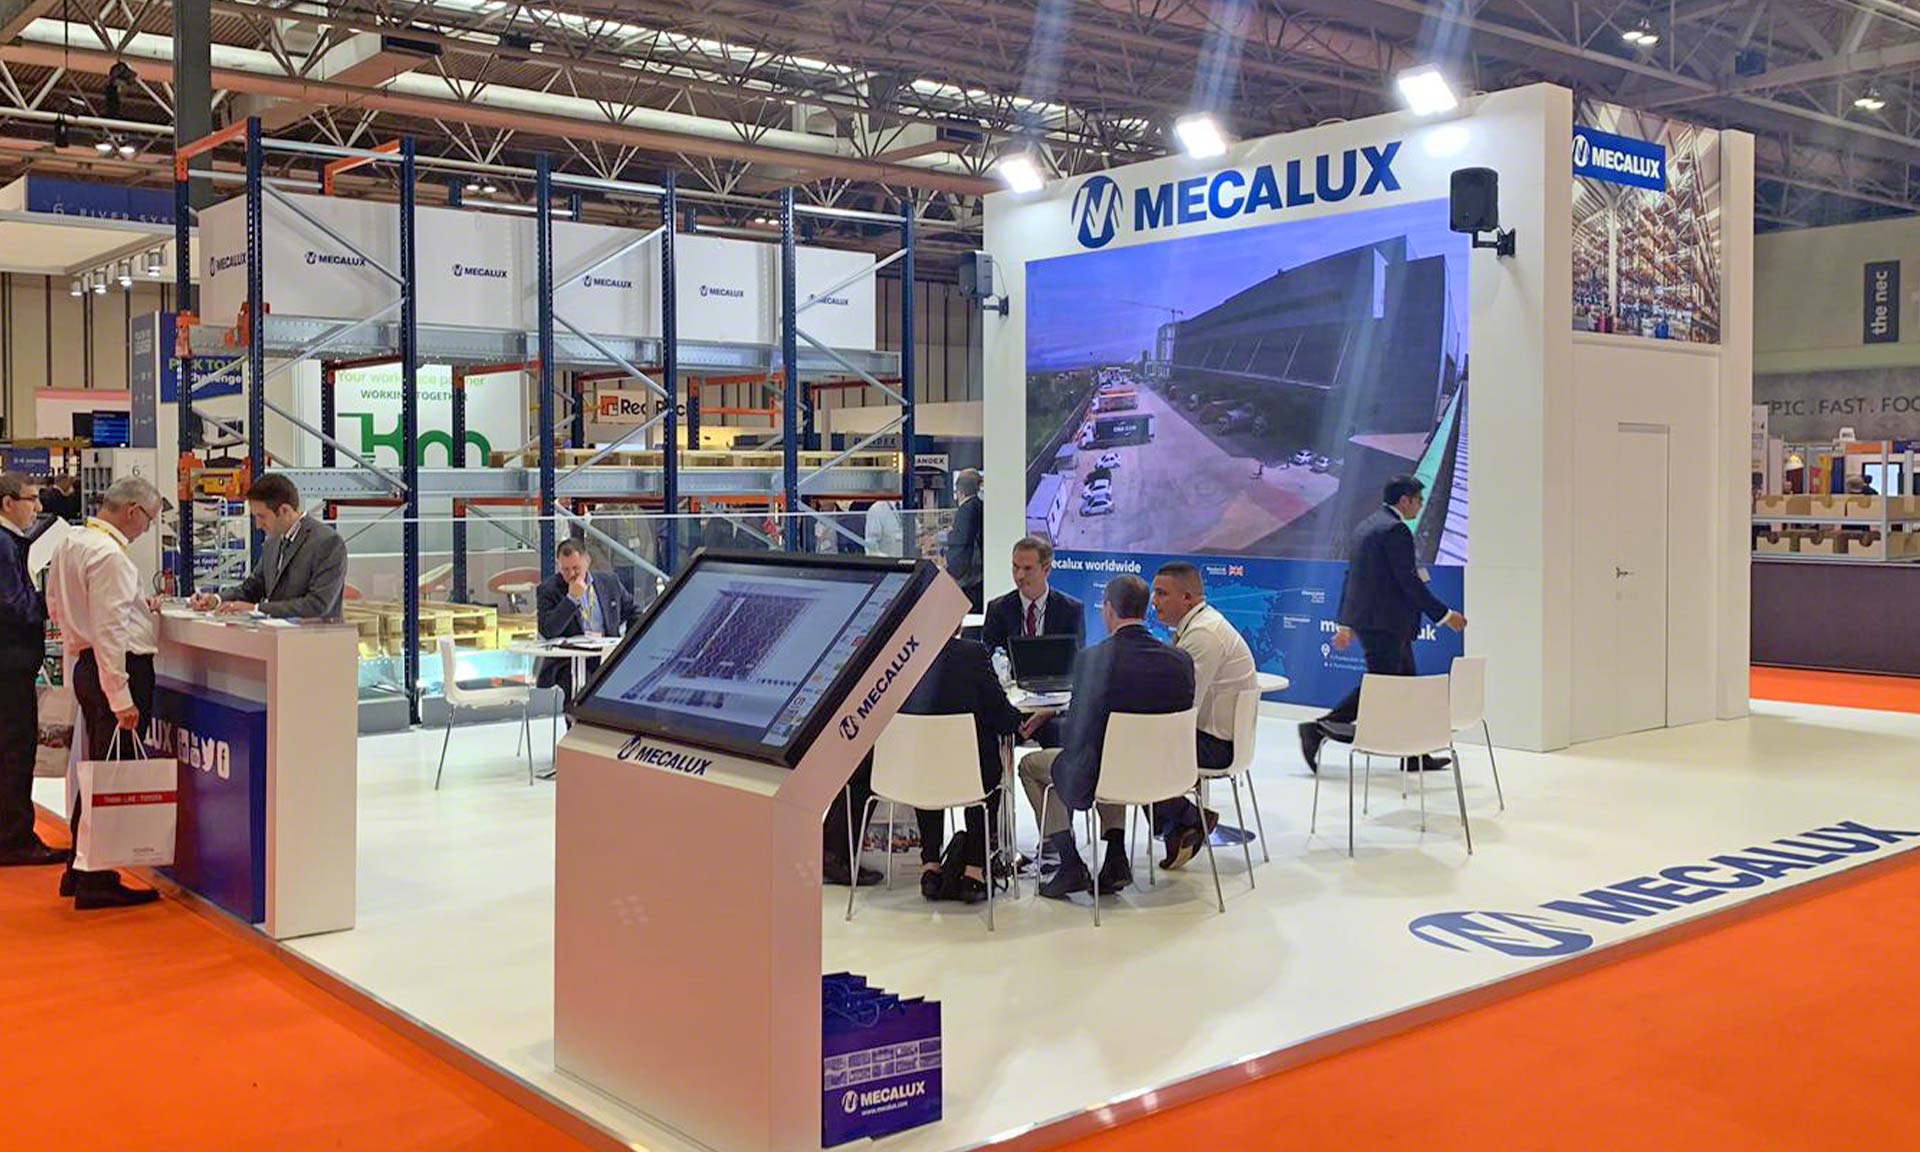 Mecalux showcases its latest innovations at the IMHX 2022 trade fair